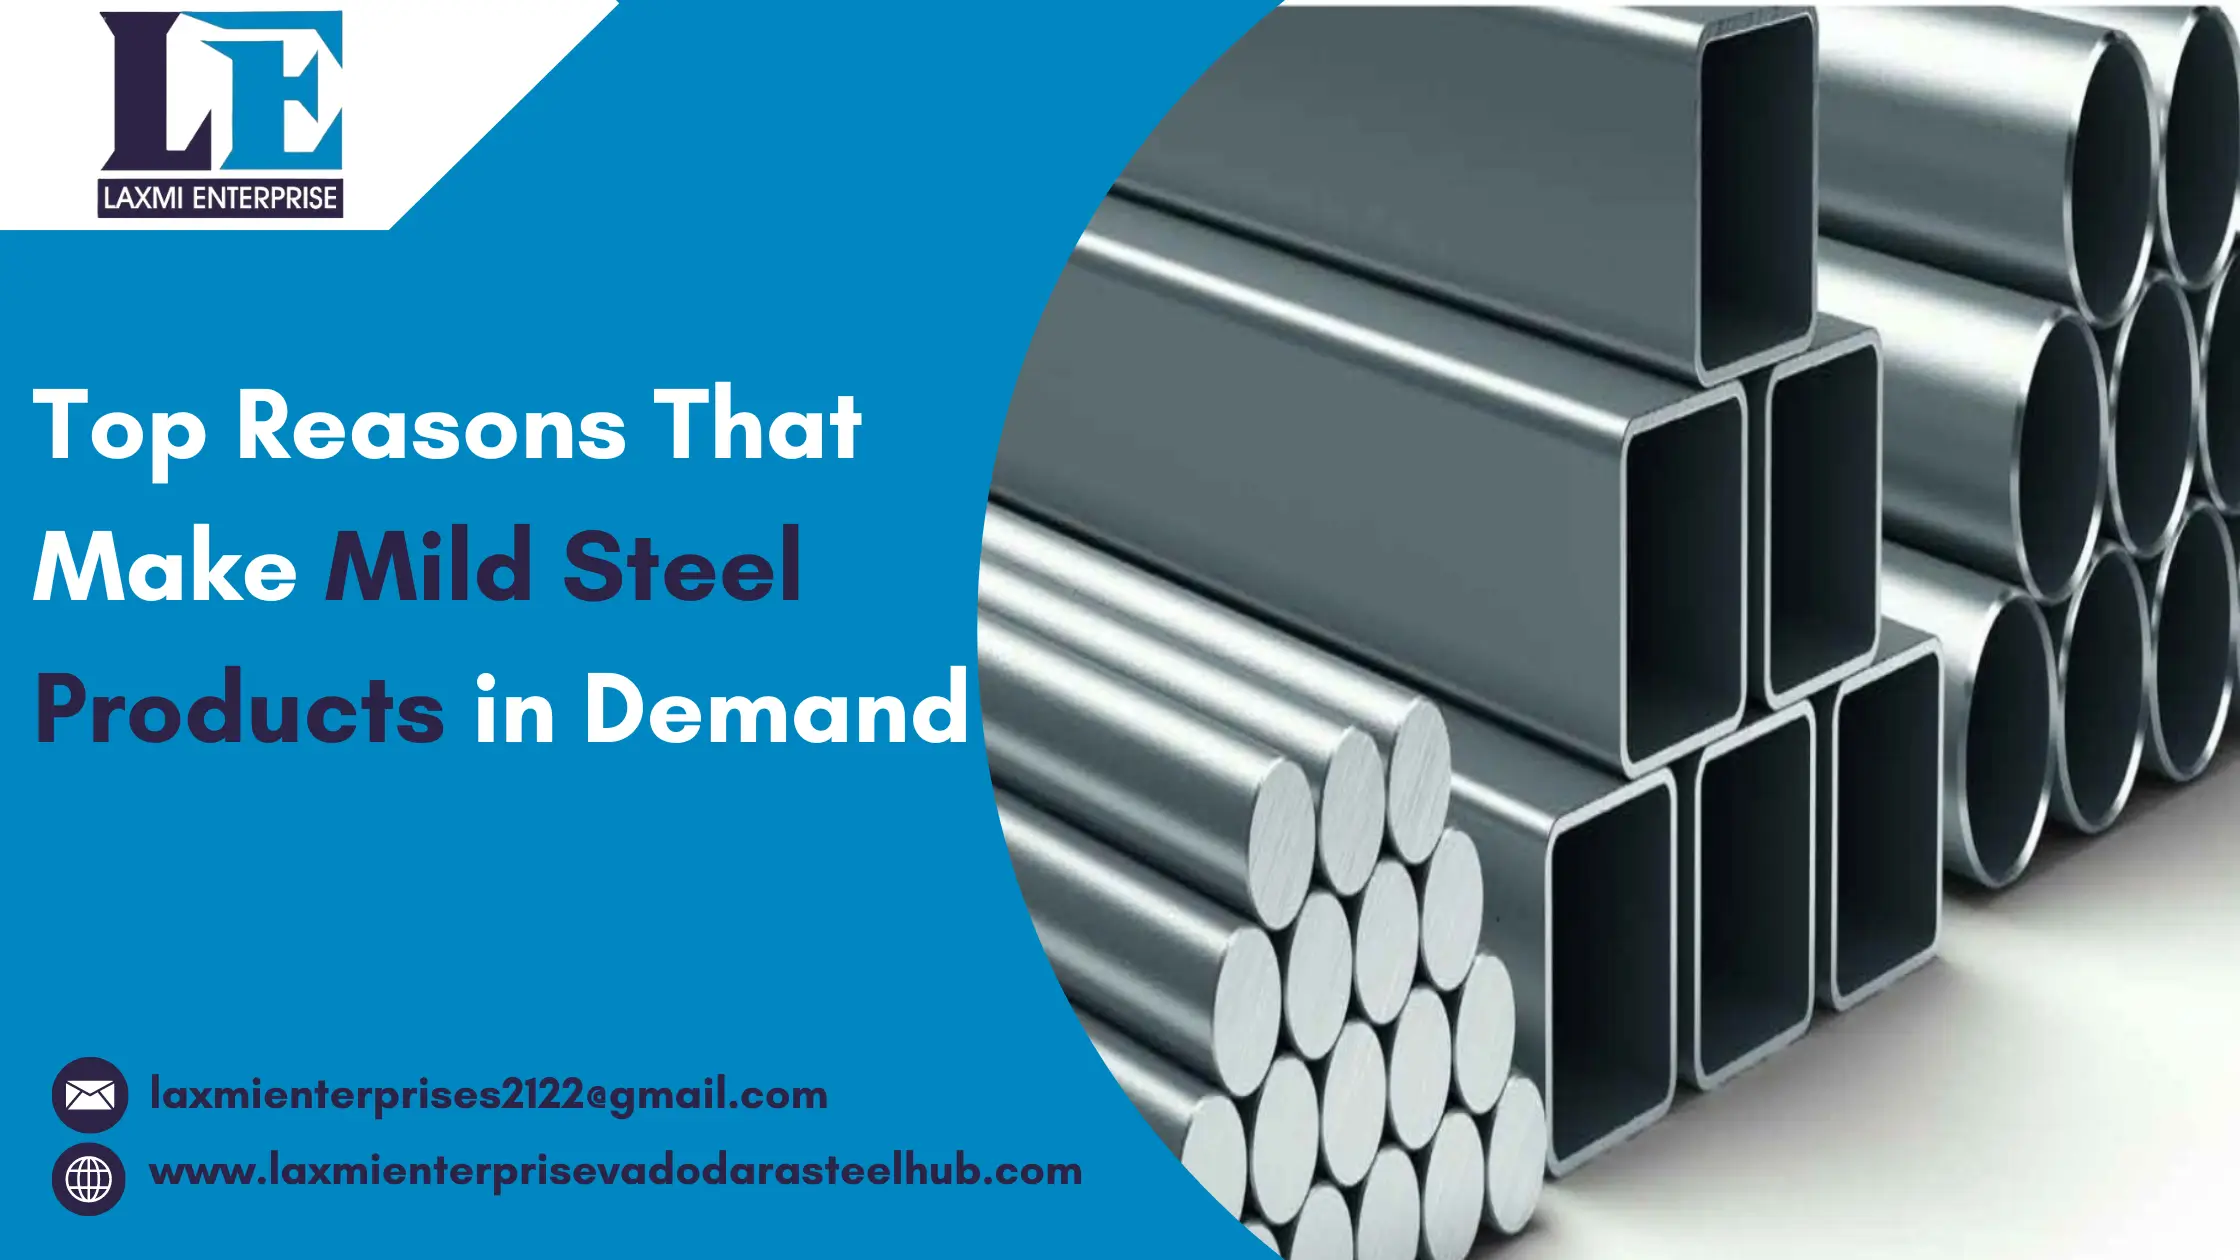 Top Reasons That Make Mild Steel Products in Demand